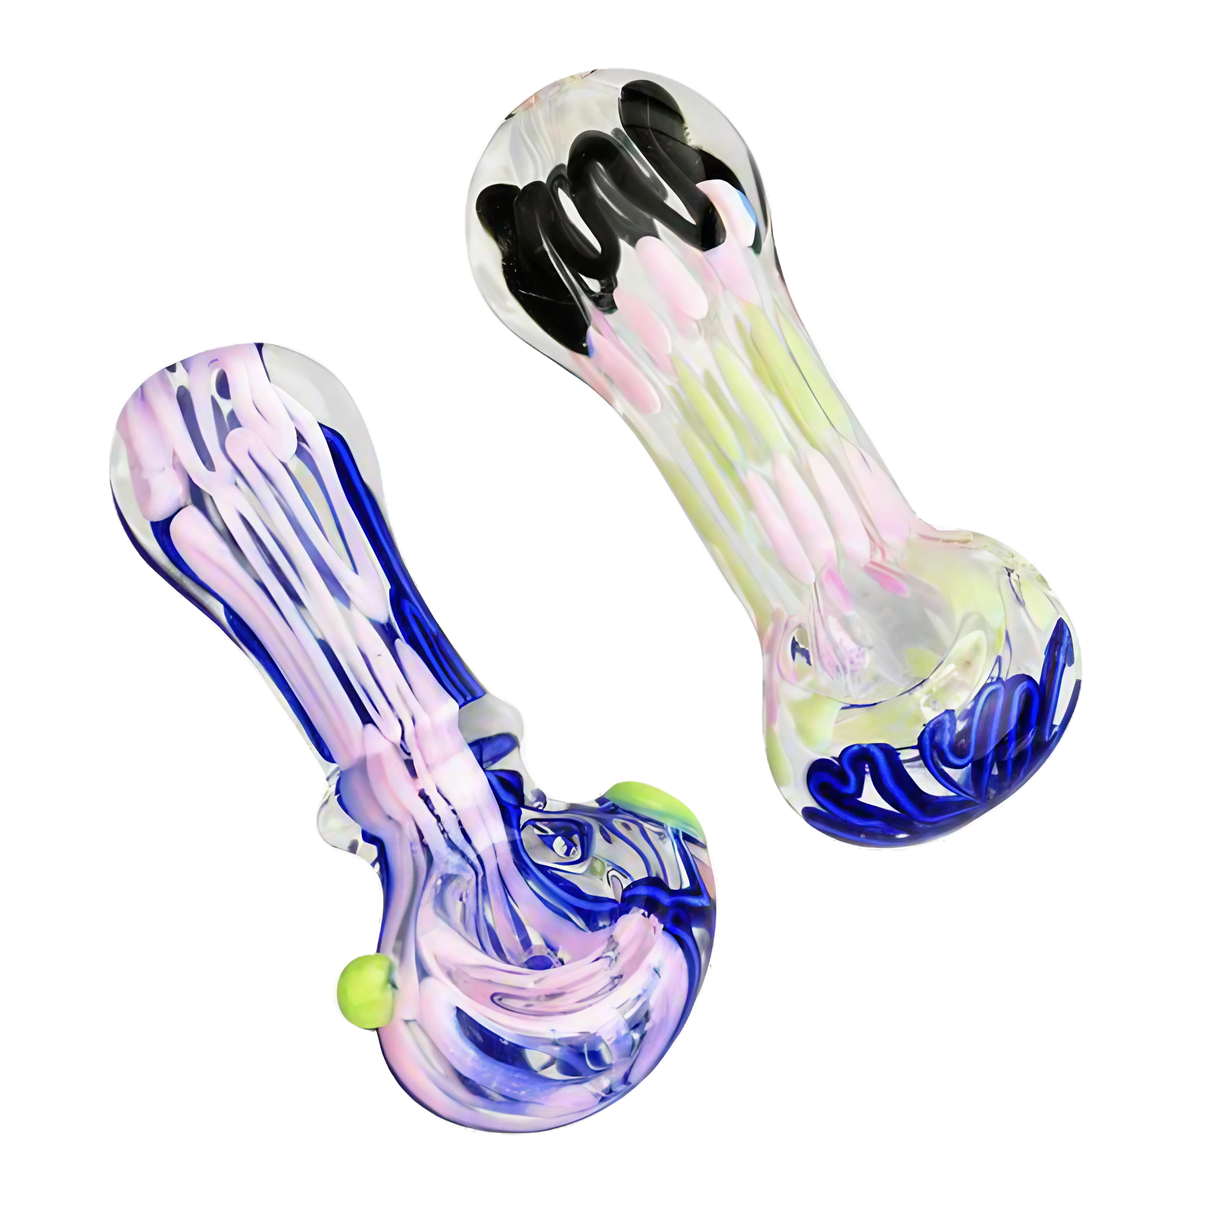 3.5" Worked Slime Strands Hand Pipe in Borosilicate Glass, Spoon Design, Green Color, Side View